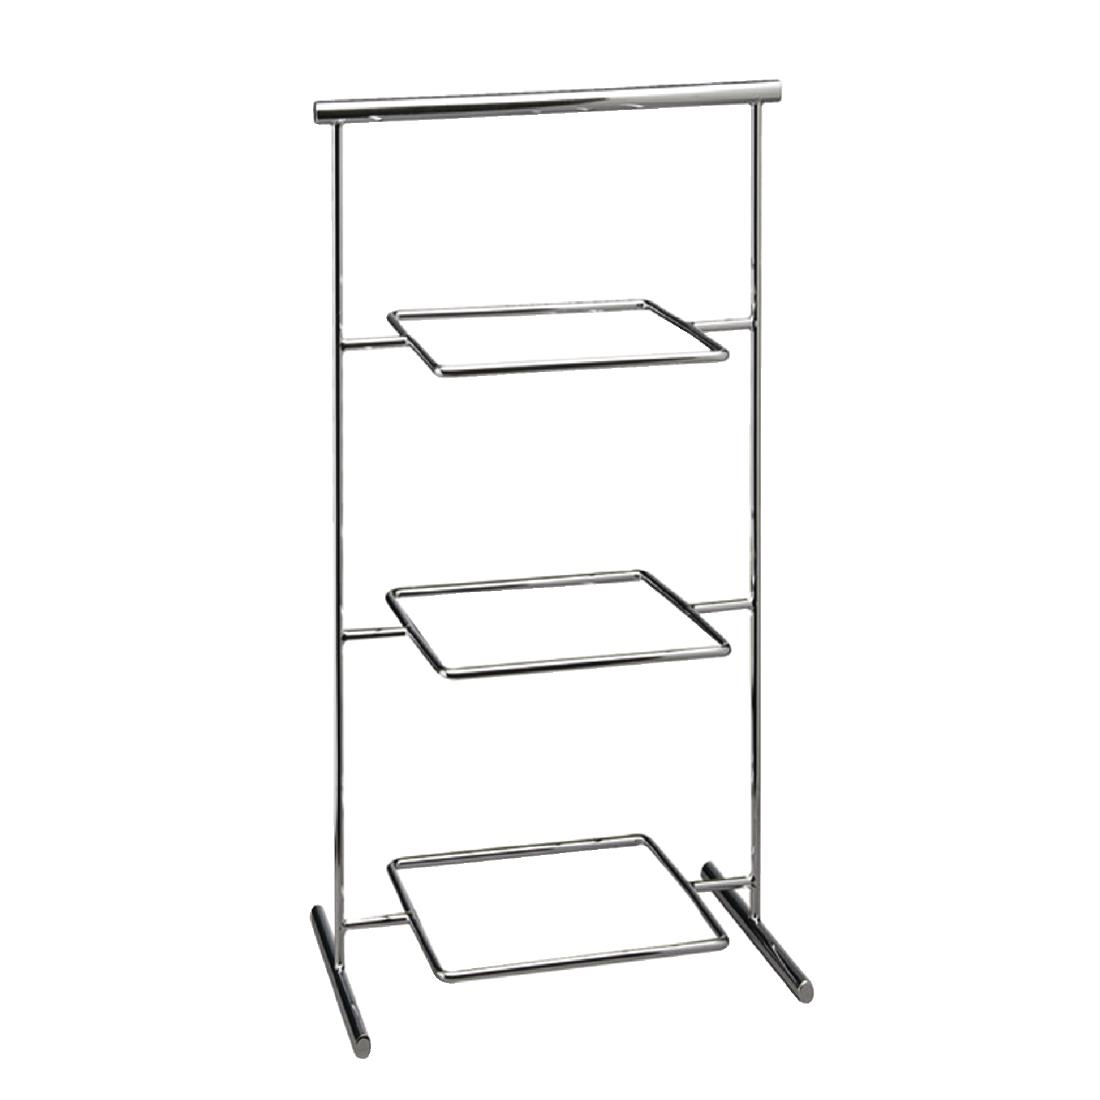 APS Pure Melamine Chrome Serving Stand 330mm